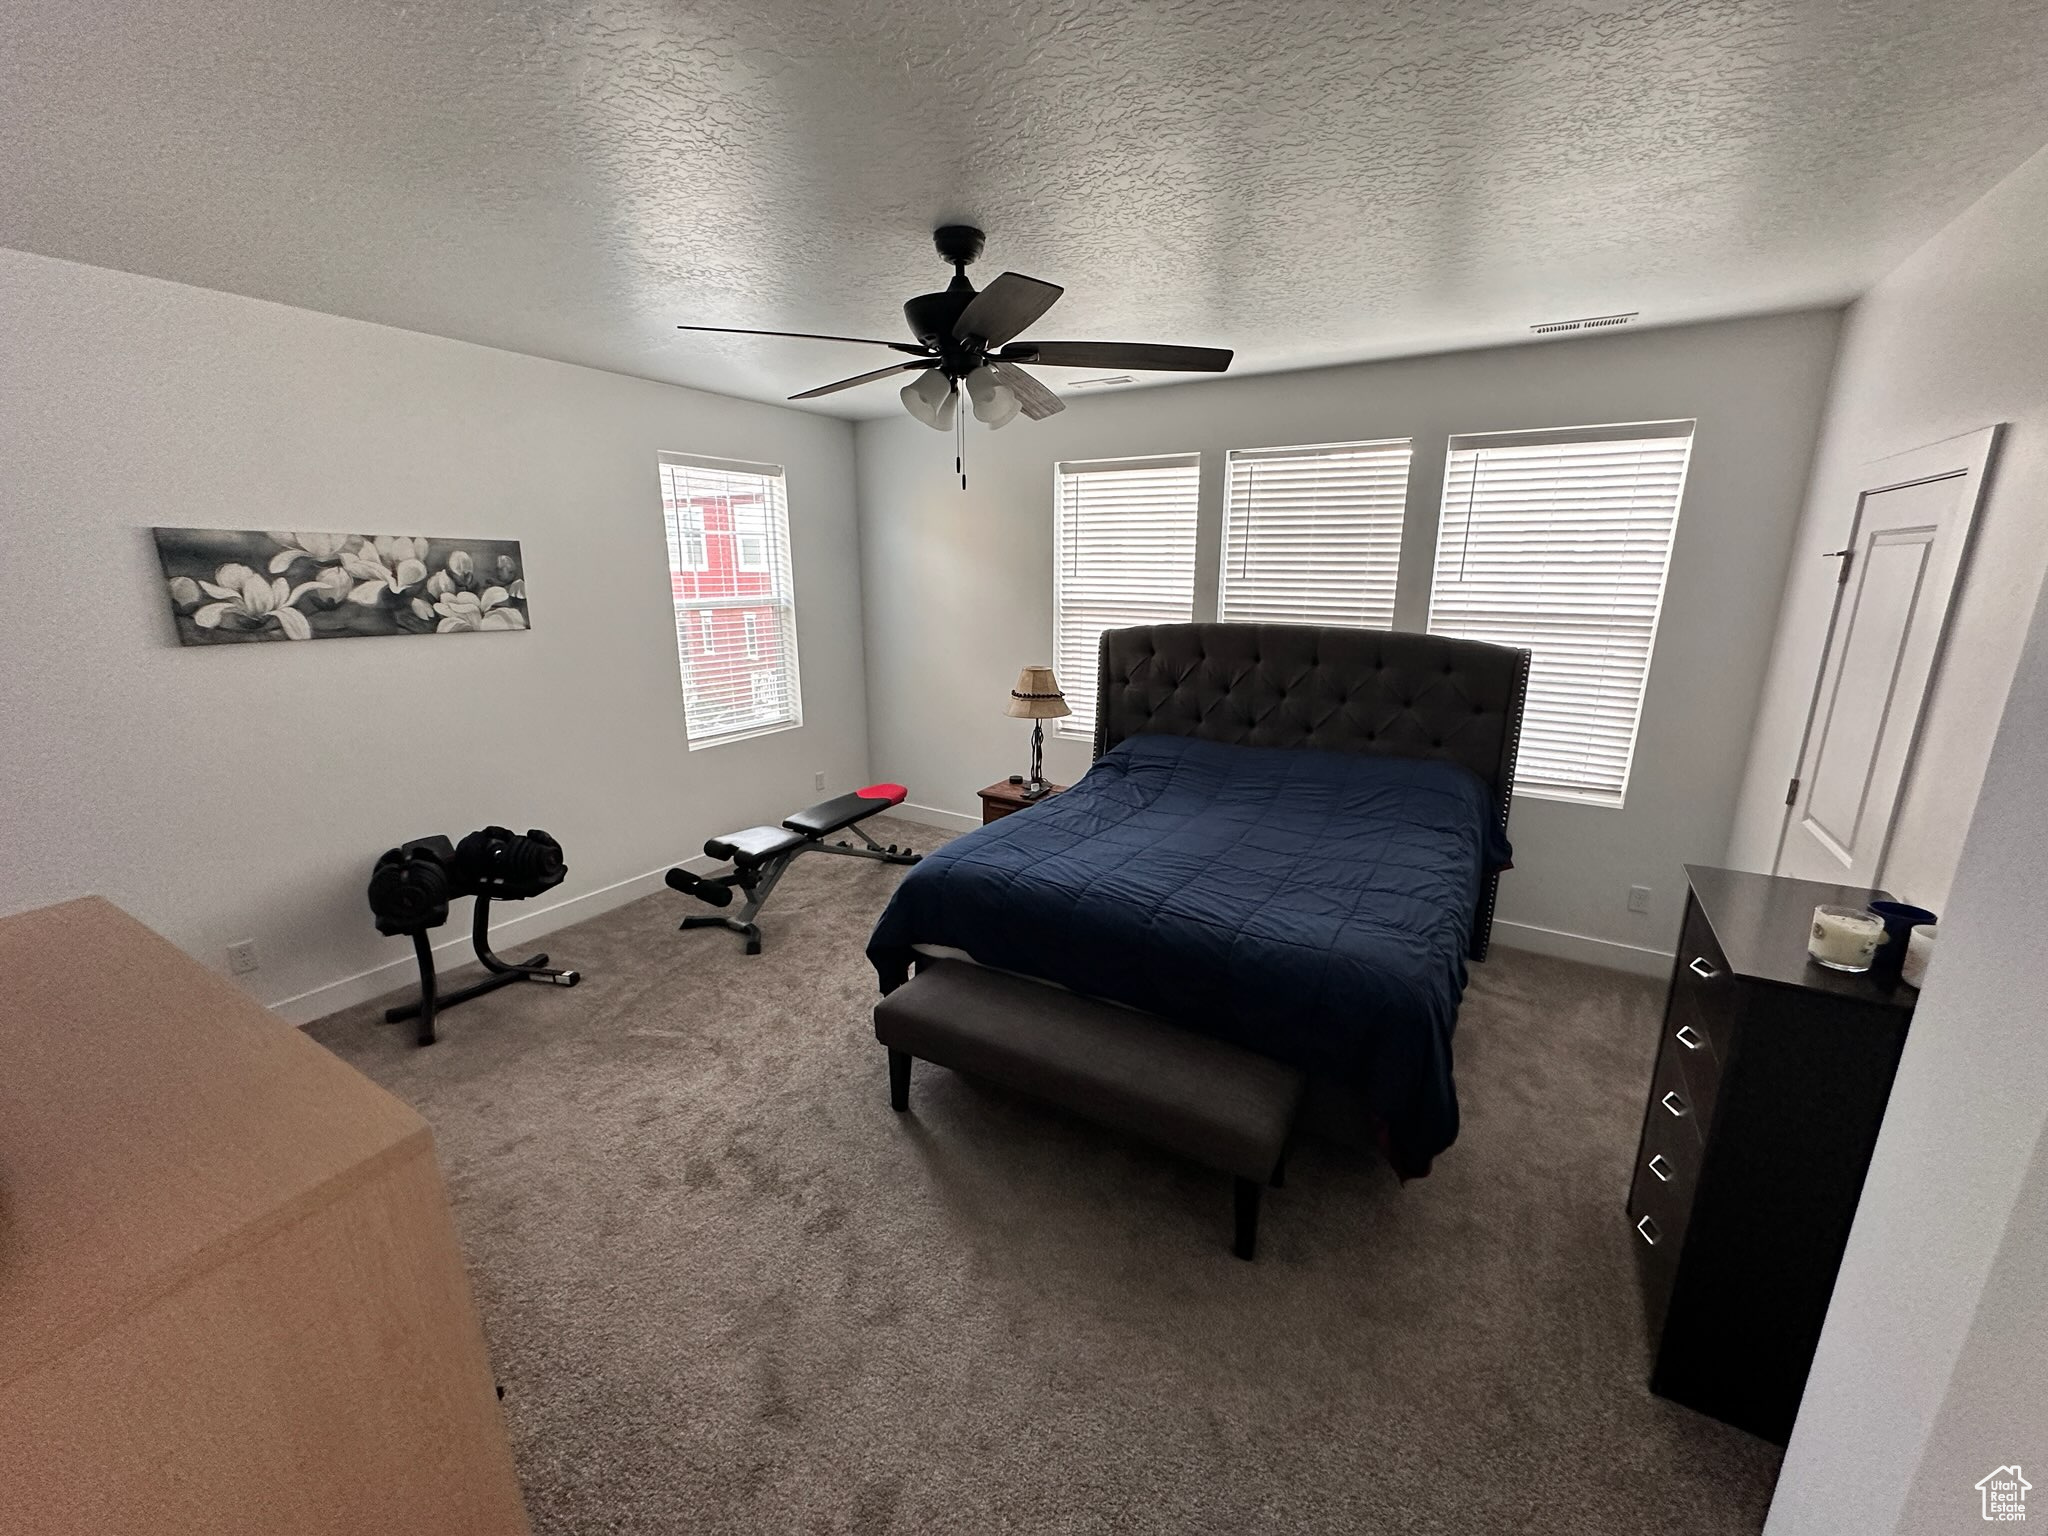 Spacious Master Bedroom with natural lighting and walk-in closet.